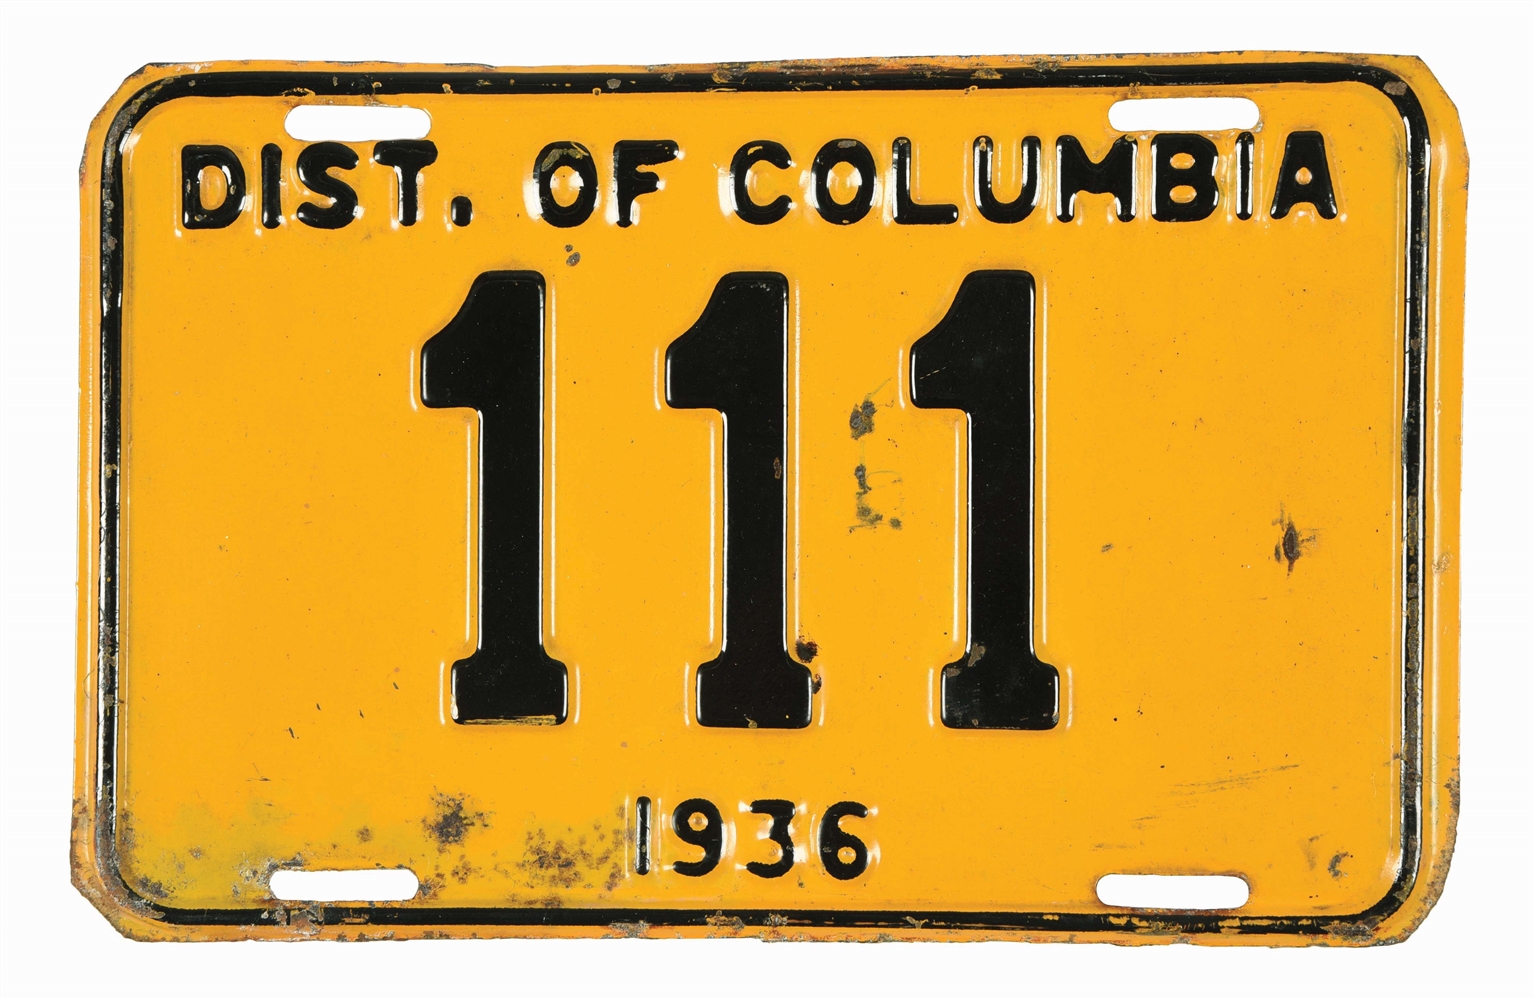 1936 DISTRICT OF COLUMBIA LICENSE PLATE #111.